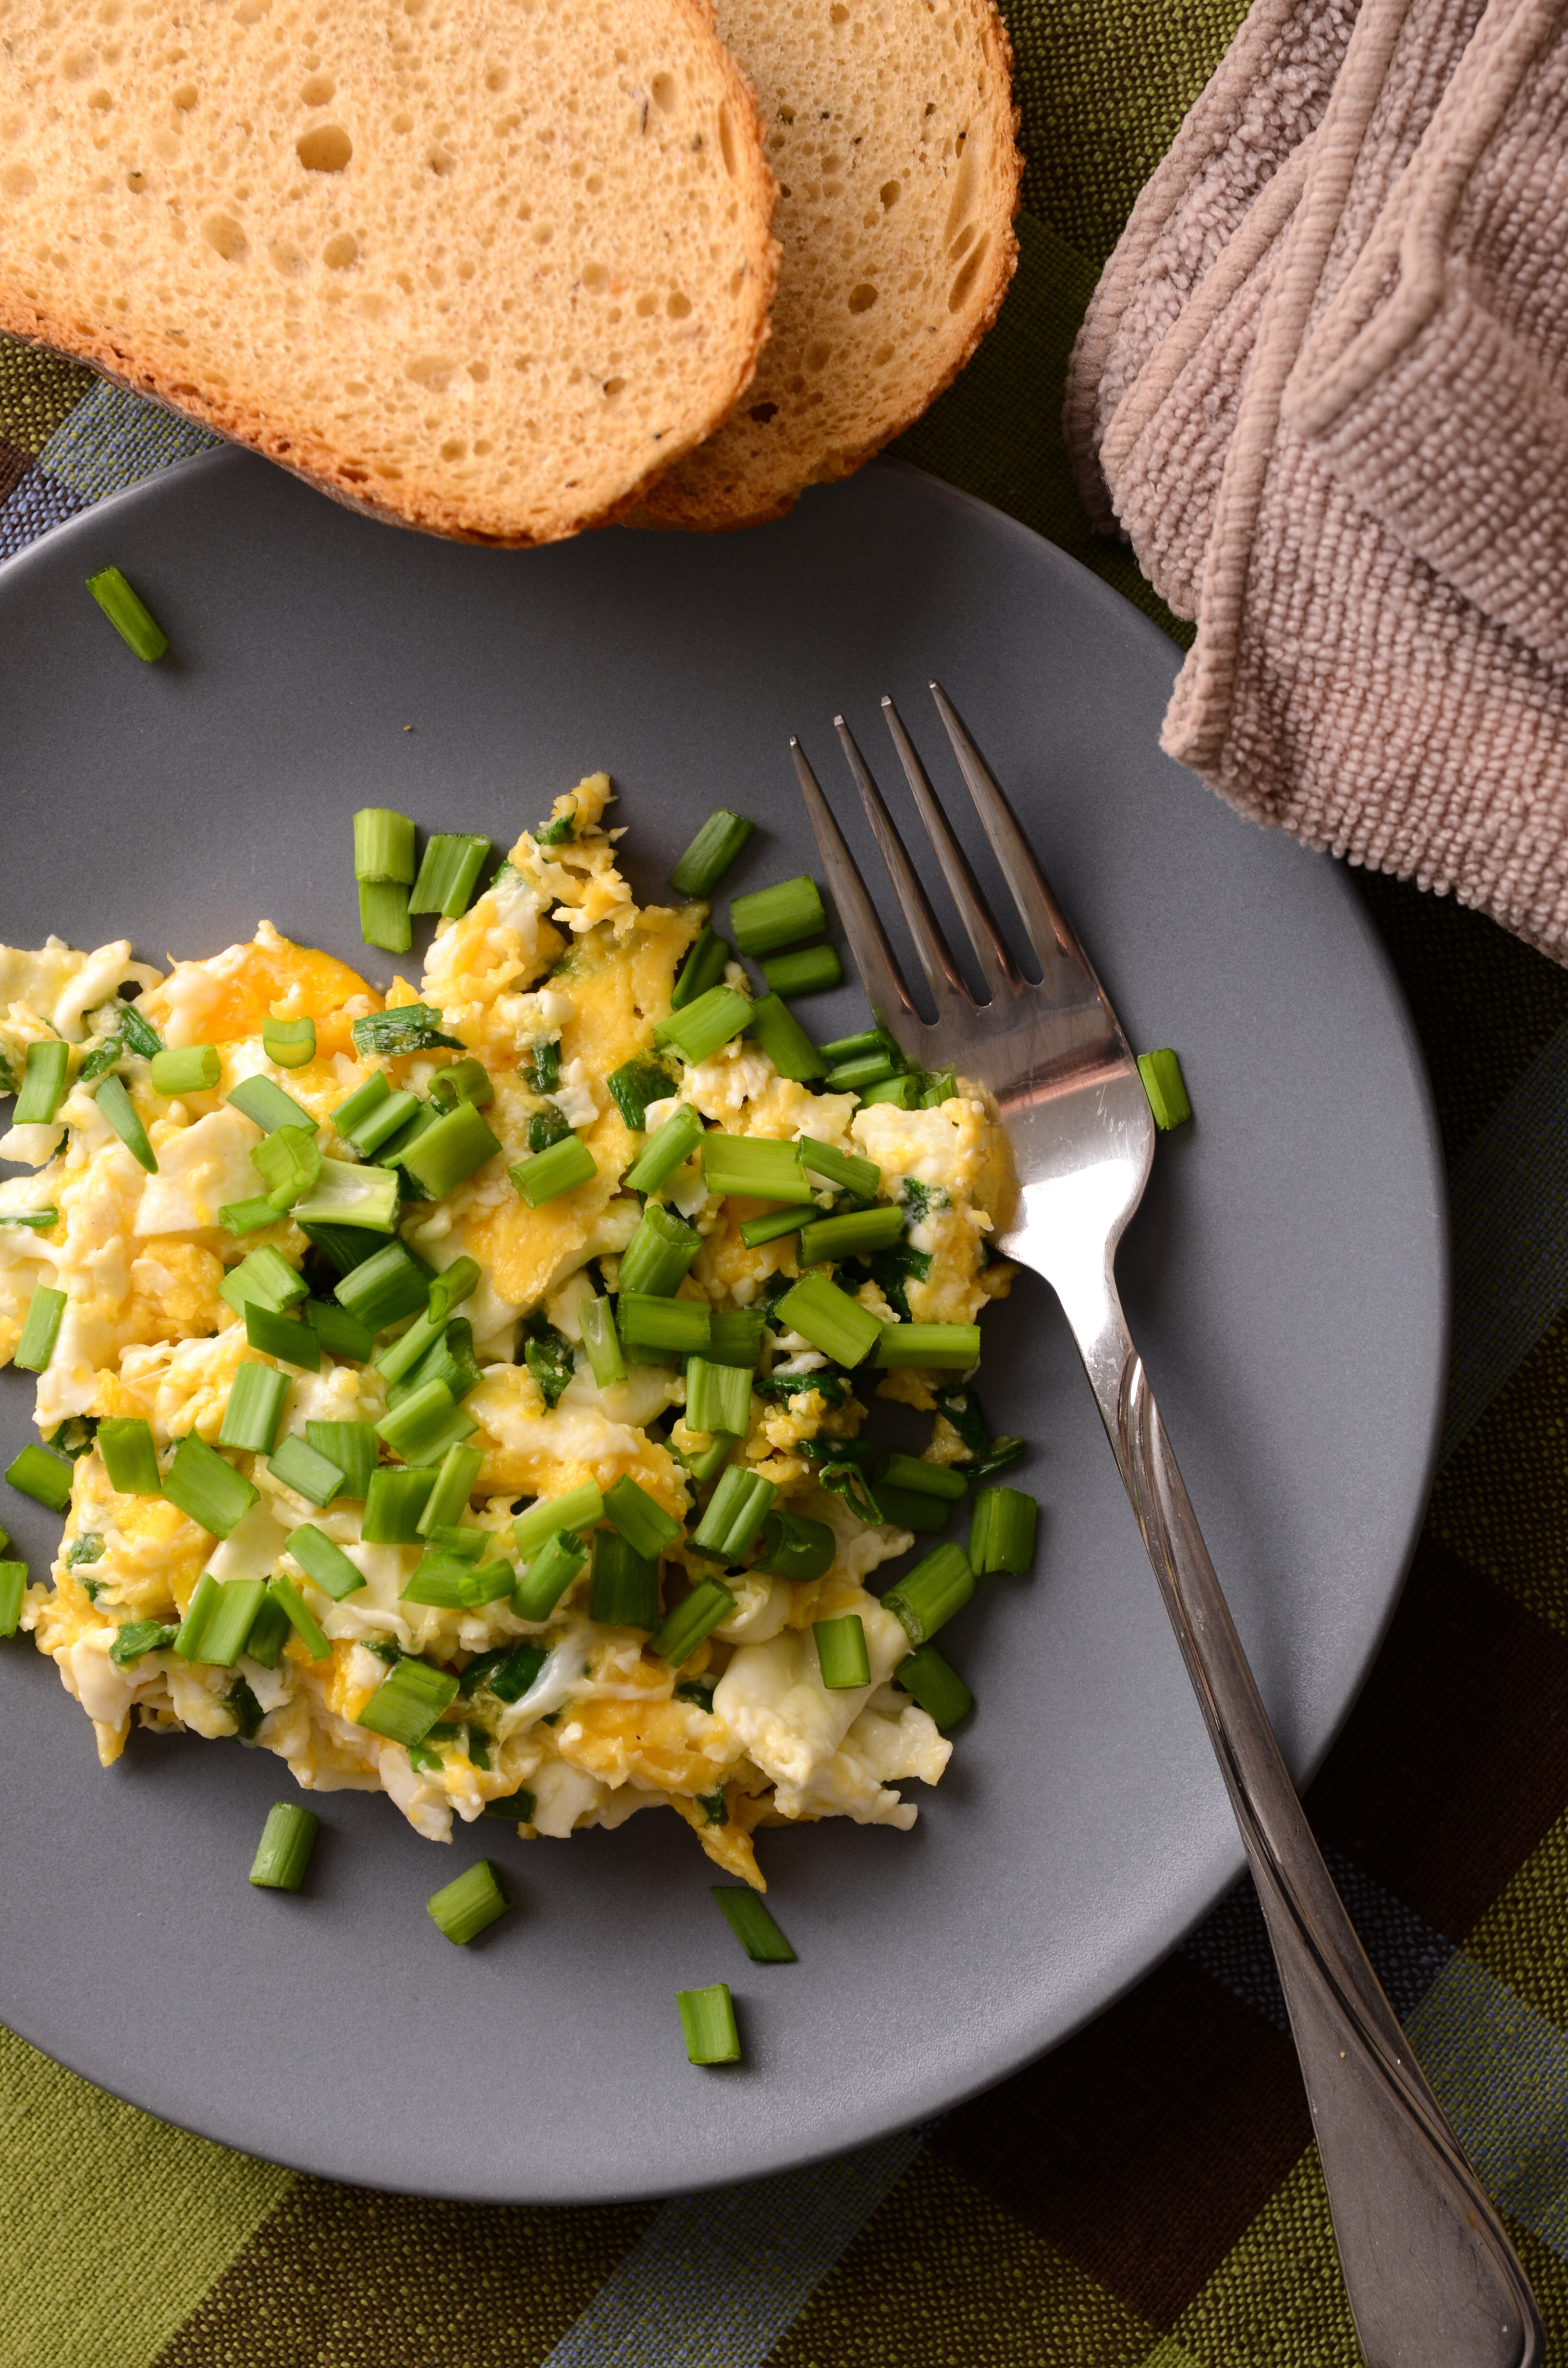 Scrambled eggs with fresh chives